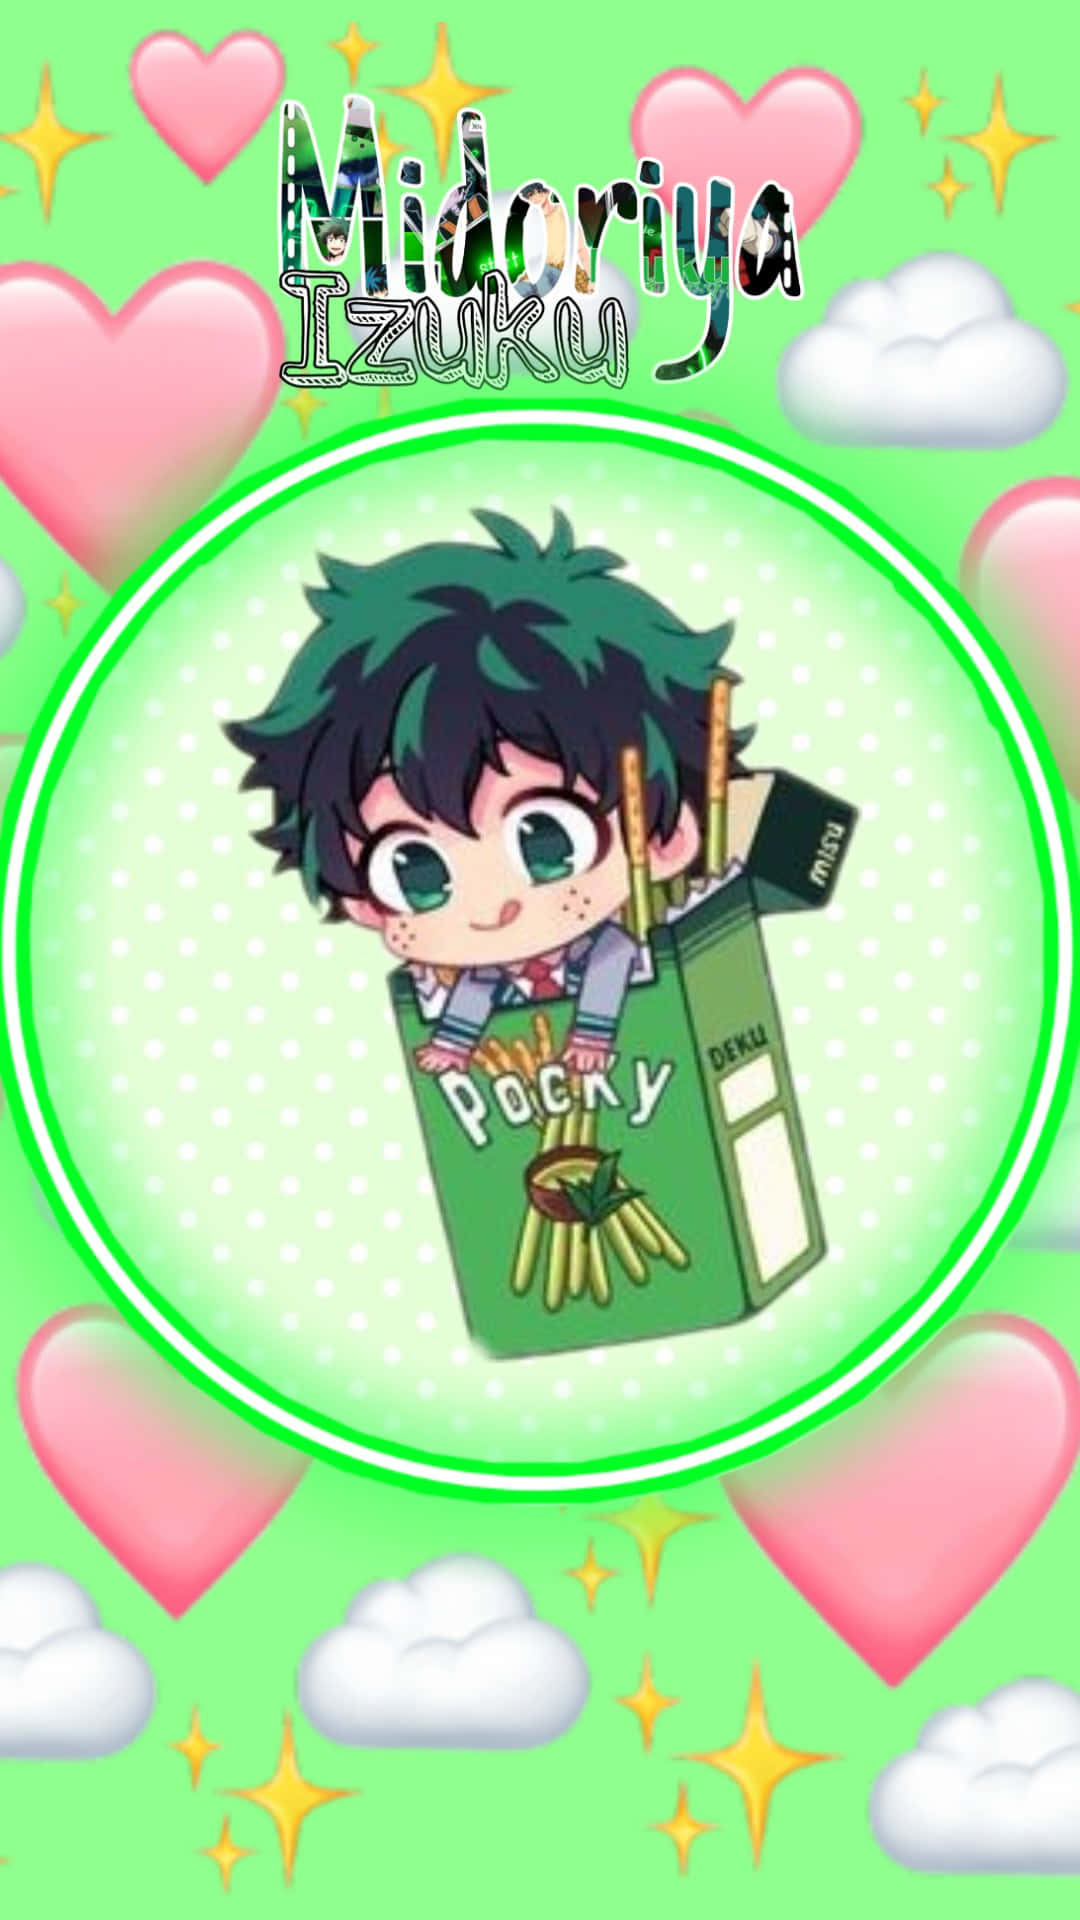 Introducing Baby Deku, an adorable and courageous hero bursting with youthful enthusiasm Wallpaper